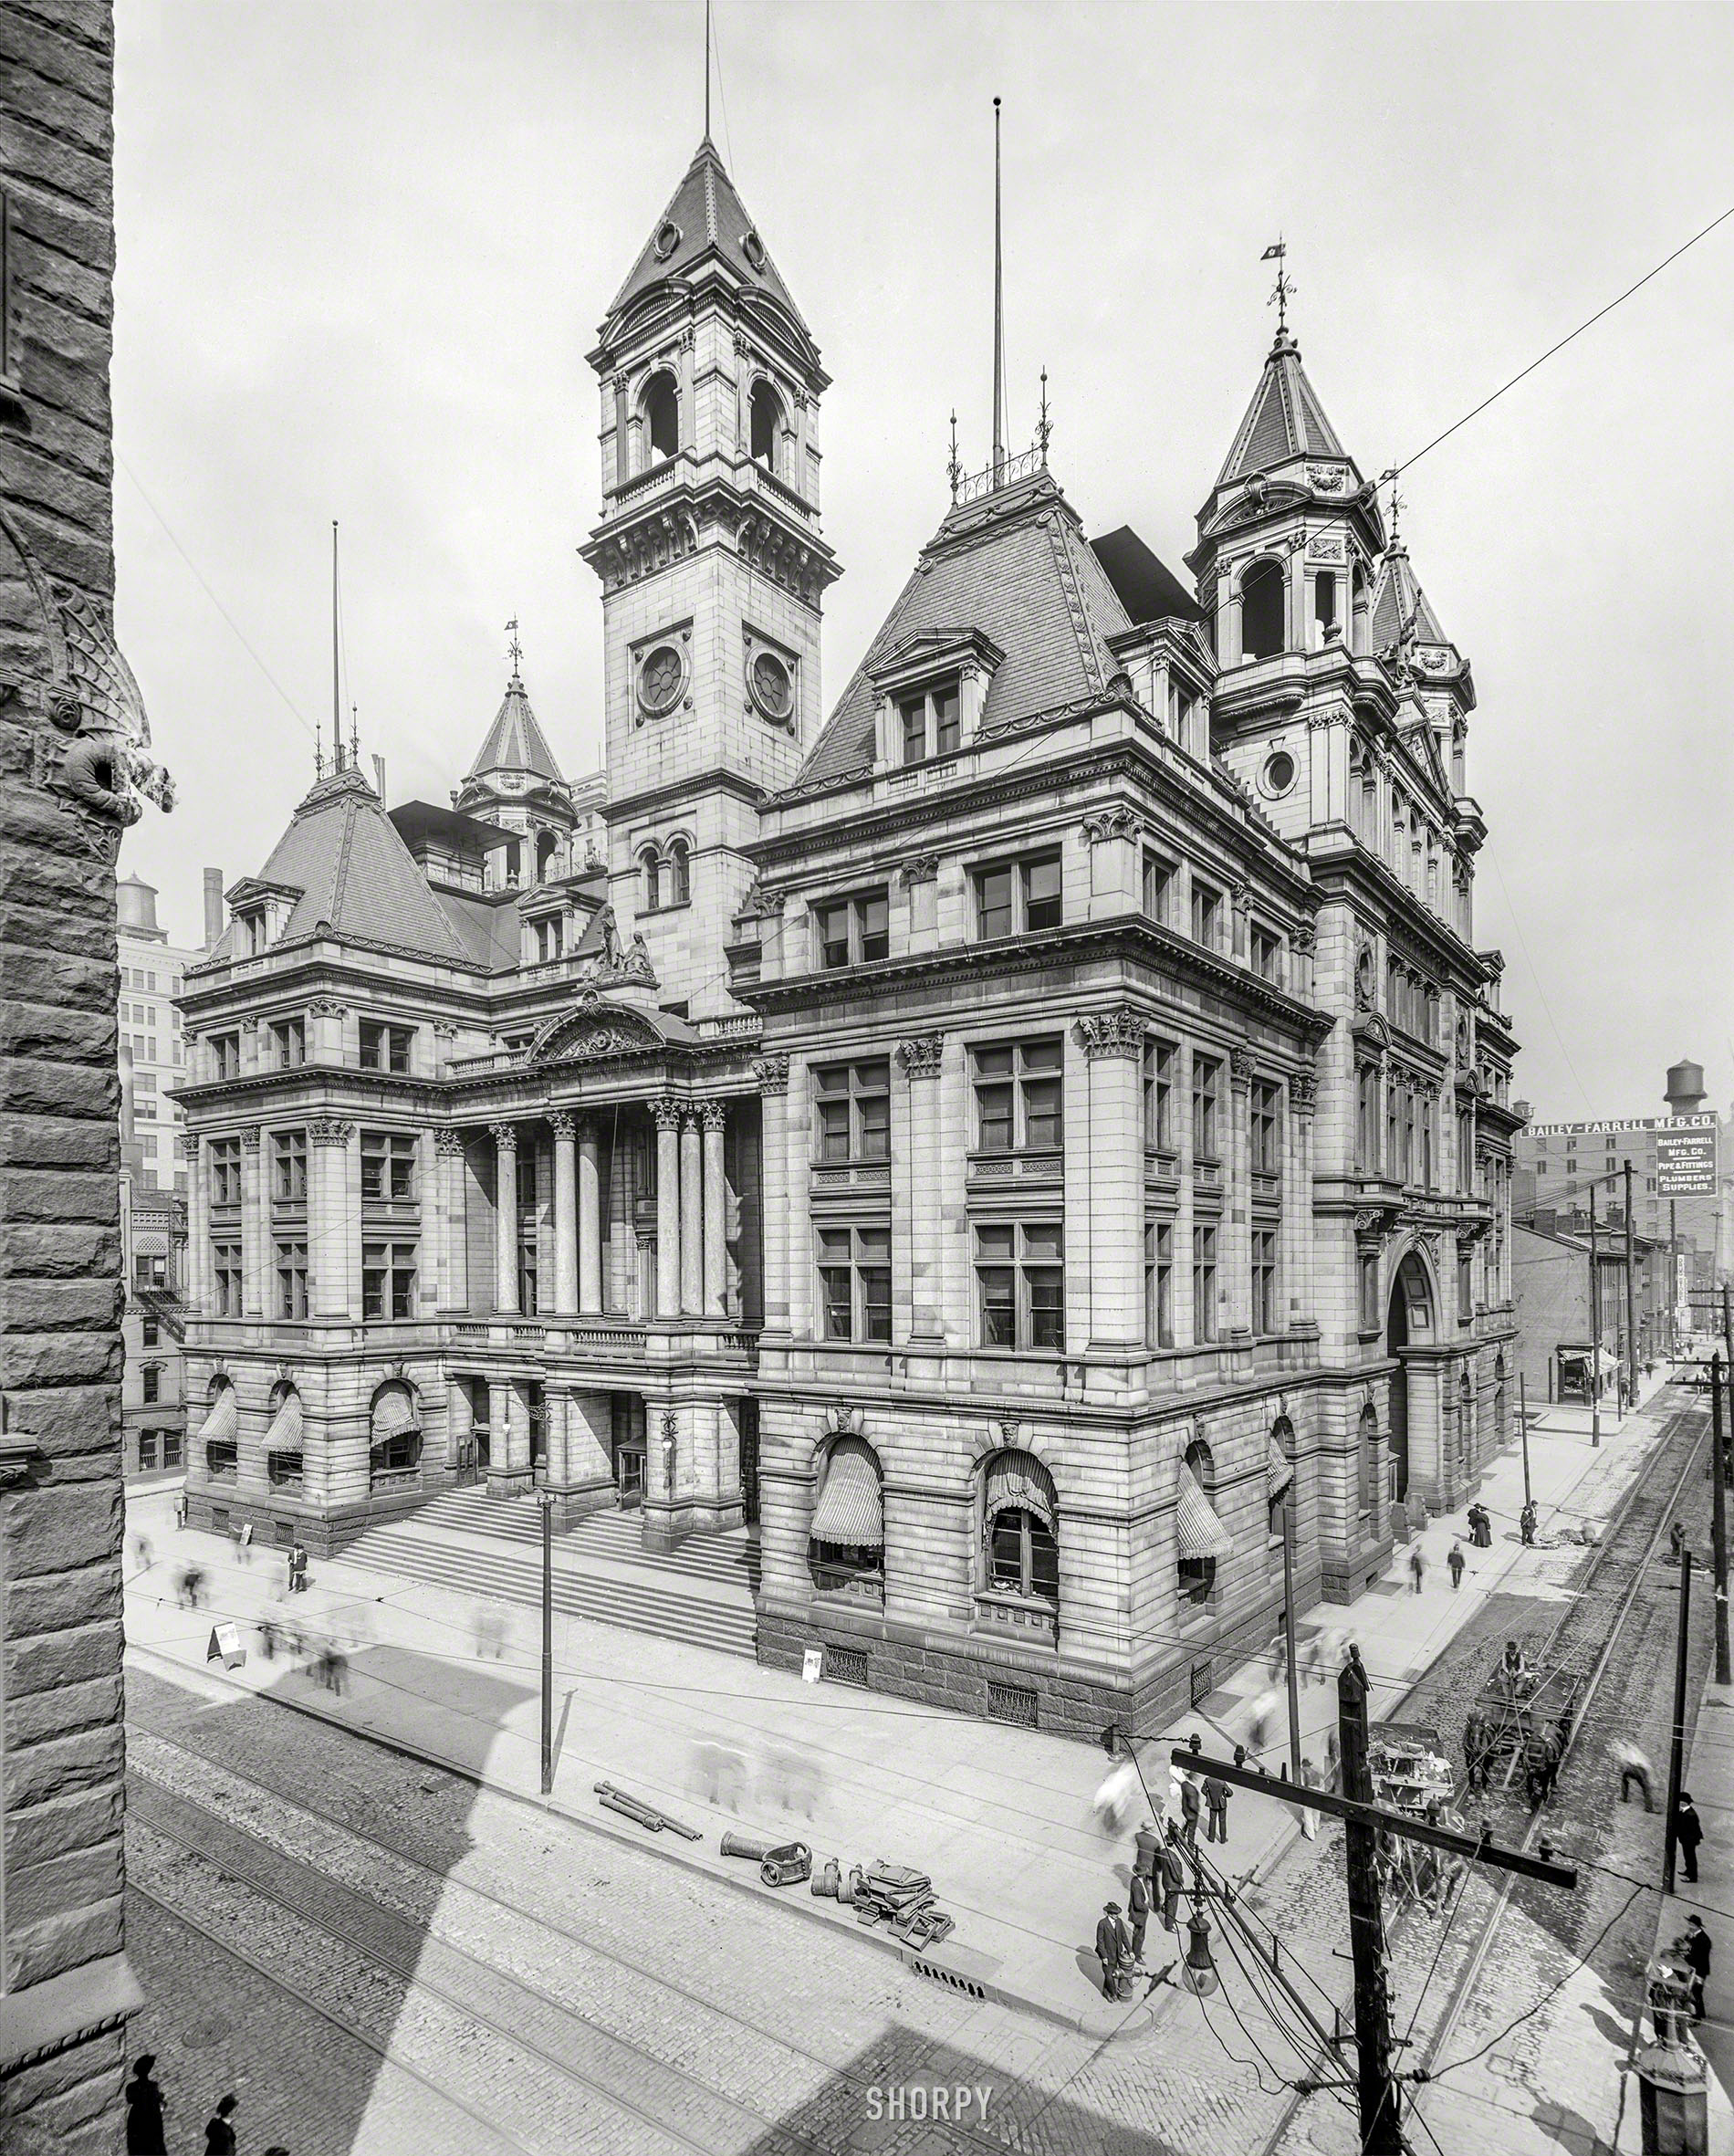 Pittsburgh circa 1904. "Post Office, Fourth Avenue and Smithfield Street." 8x10 inch dry plate glass negative, Detroit Photographic Company. View full size.